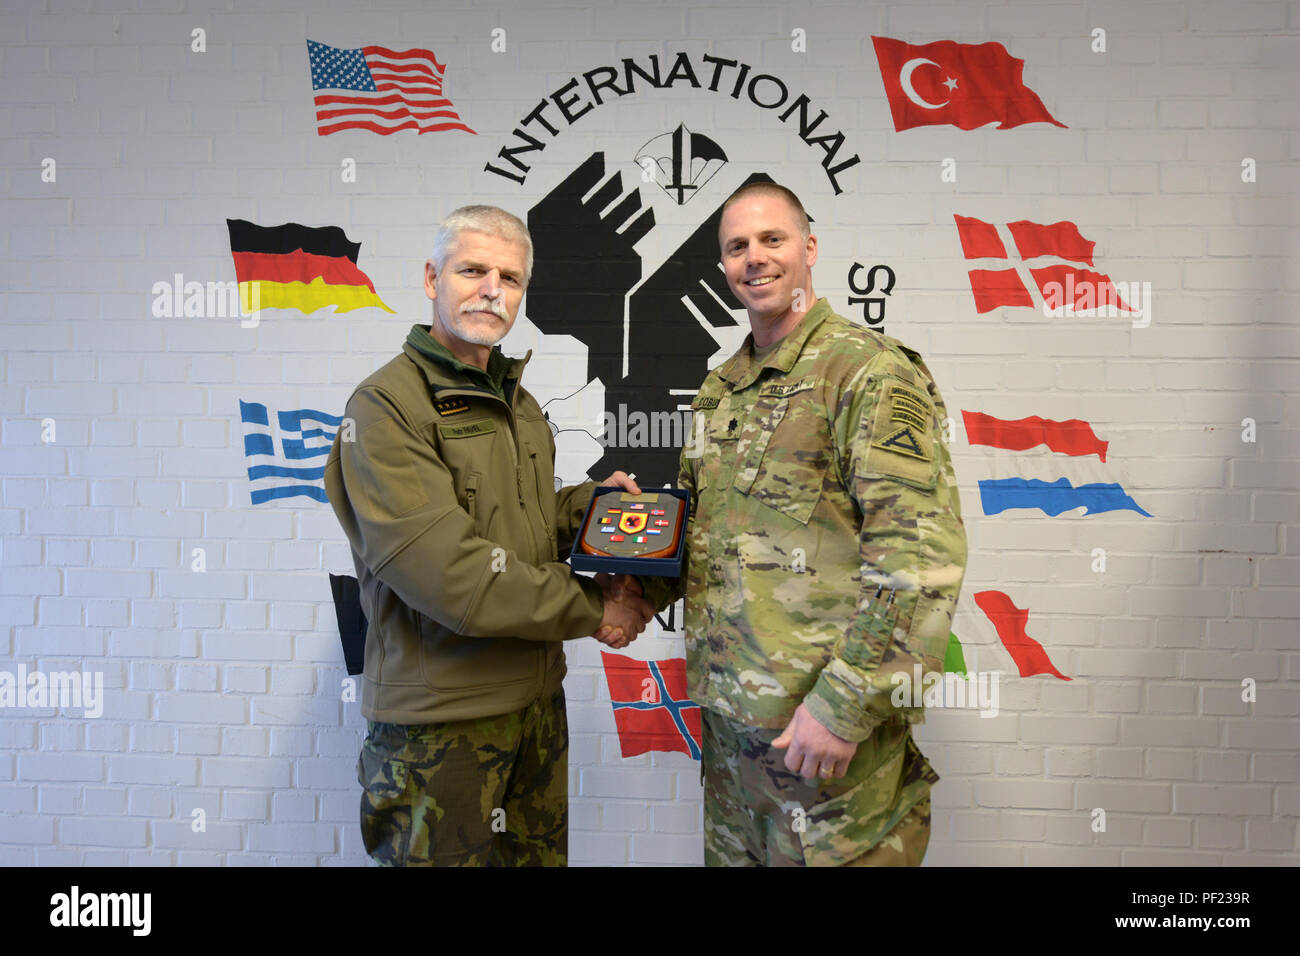 Czech Republic Army Gen. Petr Pavel, chairman of the NATO Military Committee is hosted by the staff of the International Special Training Centre for a tour of the multinational training facility located on Staufer Kaserne, Pfullendorf, Germany, Feb. 25, 2016. (U.S. Army photo by Visual Information Specialist Jason Johnston/Released) Stock Photo